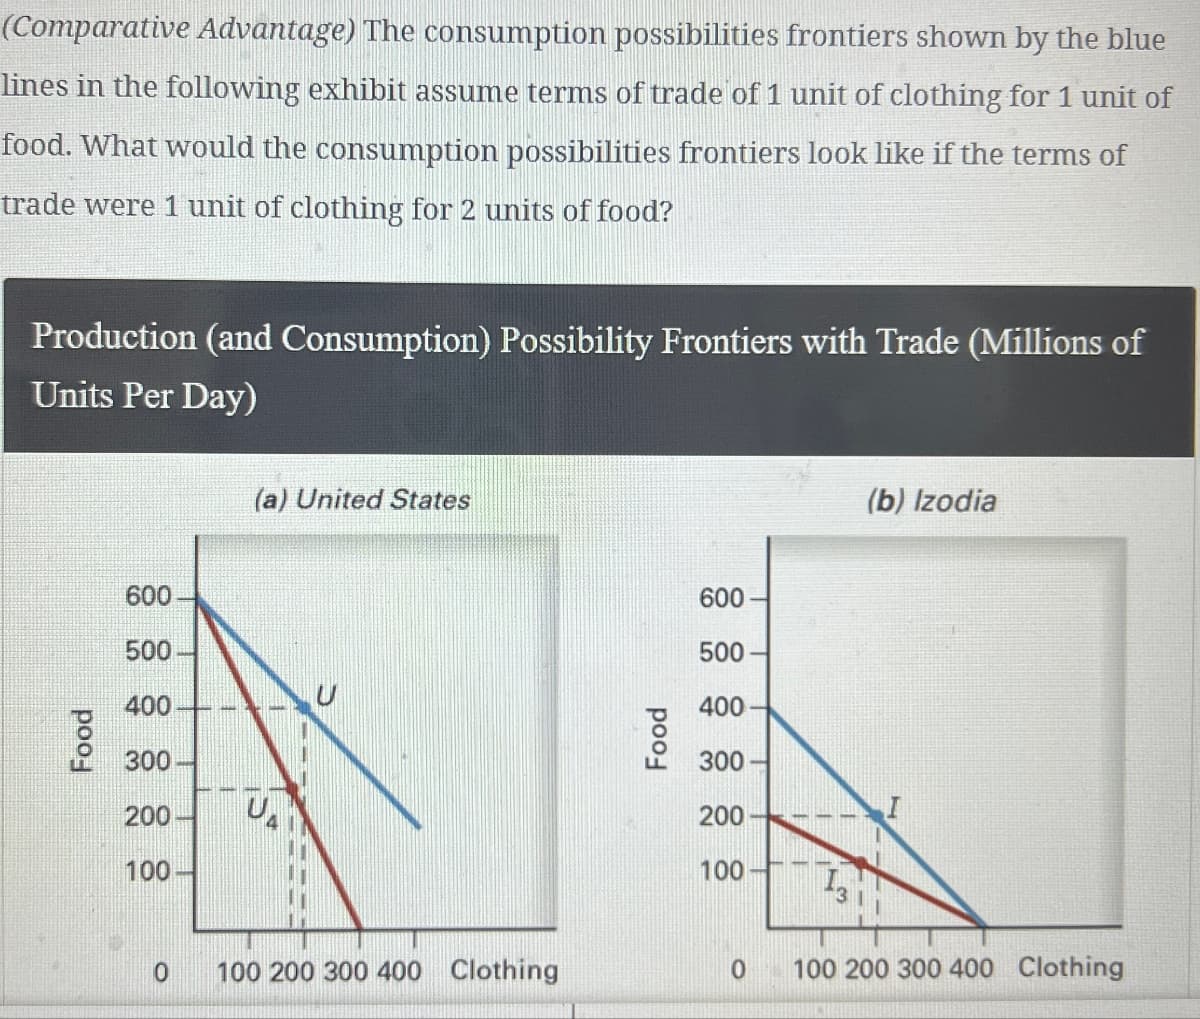 Food
(Comparative Advantage) The consumption possibilities frontiers shown by the blue
lines in the following exhibit assume terms of trade of 1 unit of clothing for 1 unit of
food. What would the consumption possibilities frontiers look like if the terms of
trade were 1 unit of clothing for 2 units of food?
Production (and Consumption) Possibility Frontiers with Trade (Millions of
Units Per Day)
(a) United States
(b) Izodia
600
500-
400
600
500
U
400
300
200
U
100
Food
300
200
100
13
0
100 200 300 400 Clothing
0
100 200 300 400 Clothing